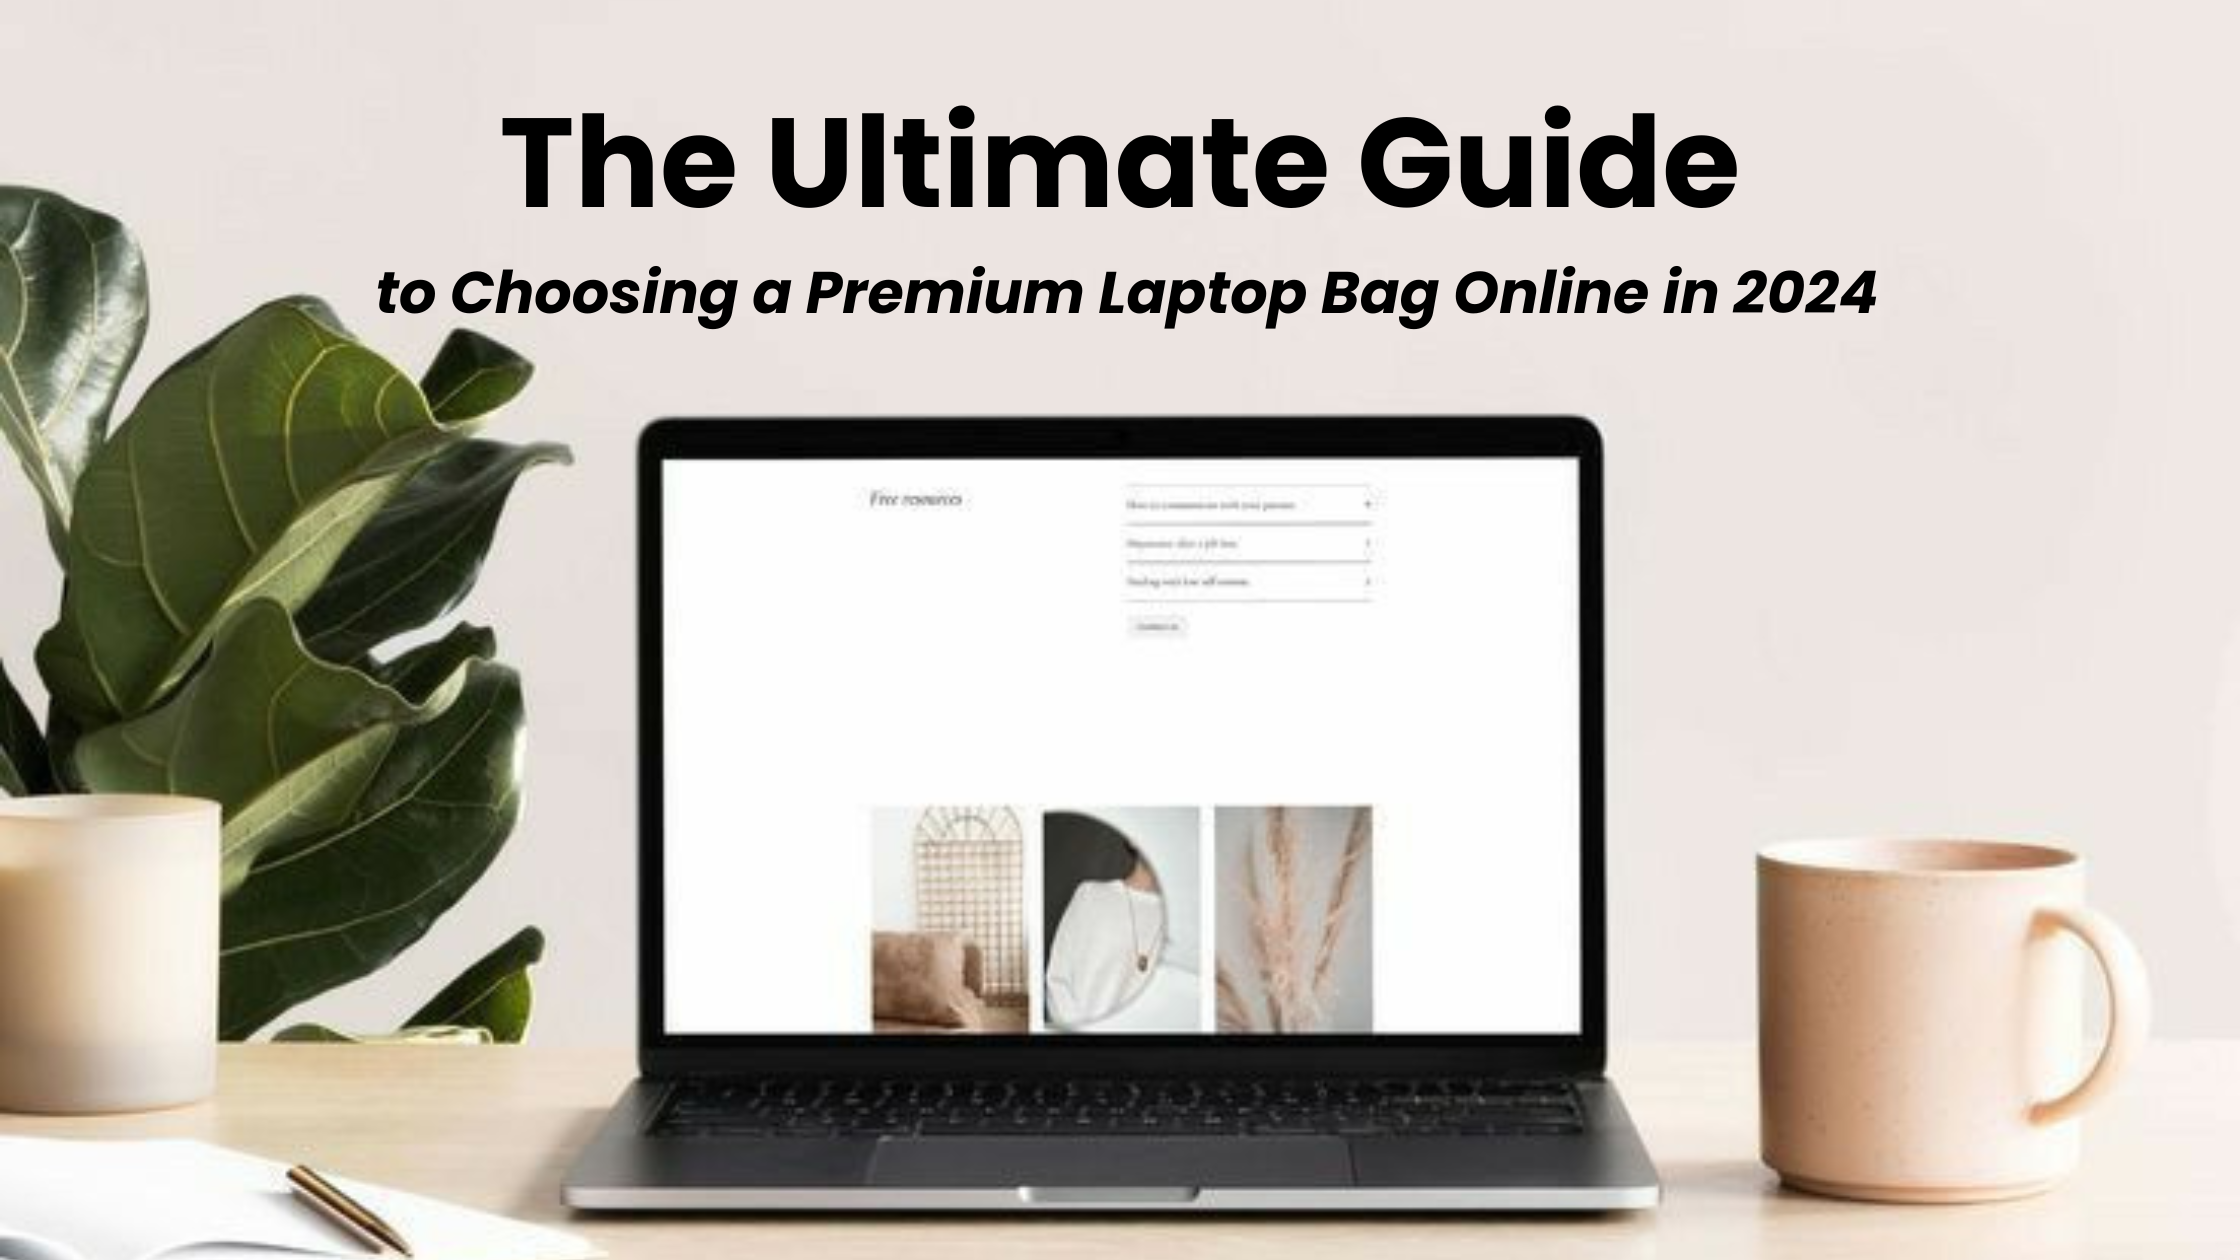 The Ultimate Guide to Choosing a Premium Laptop Bag Online in 2024